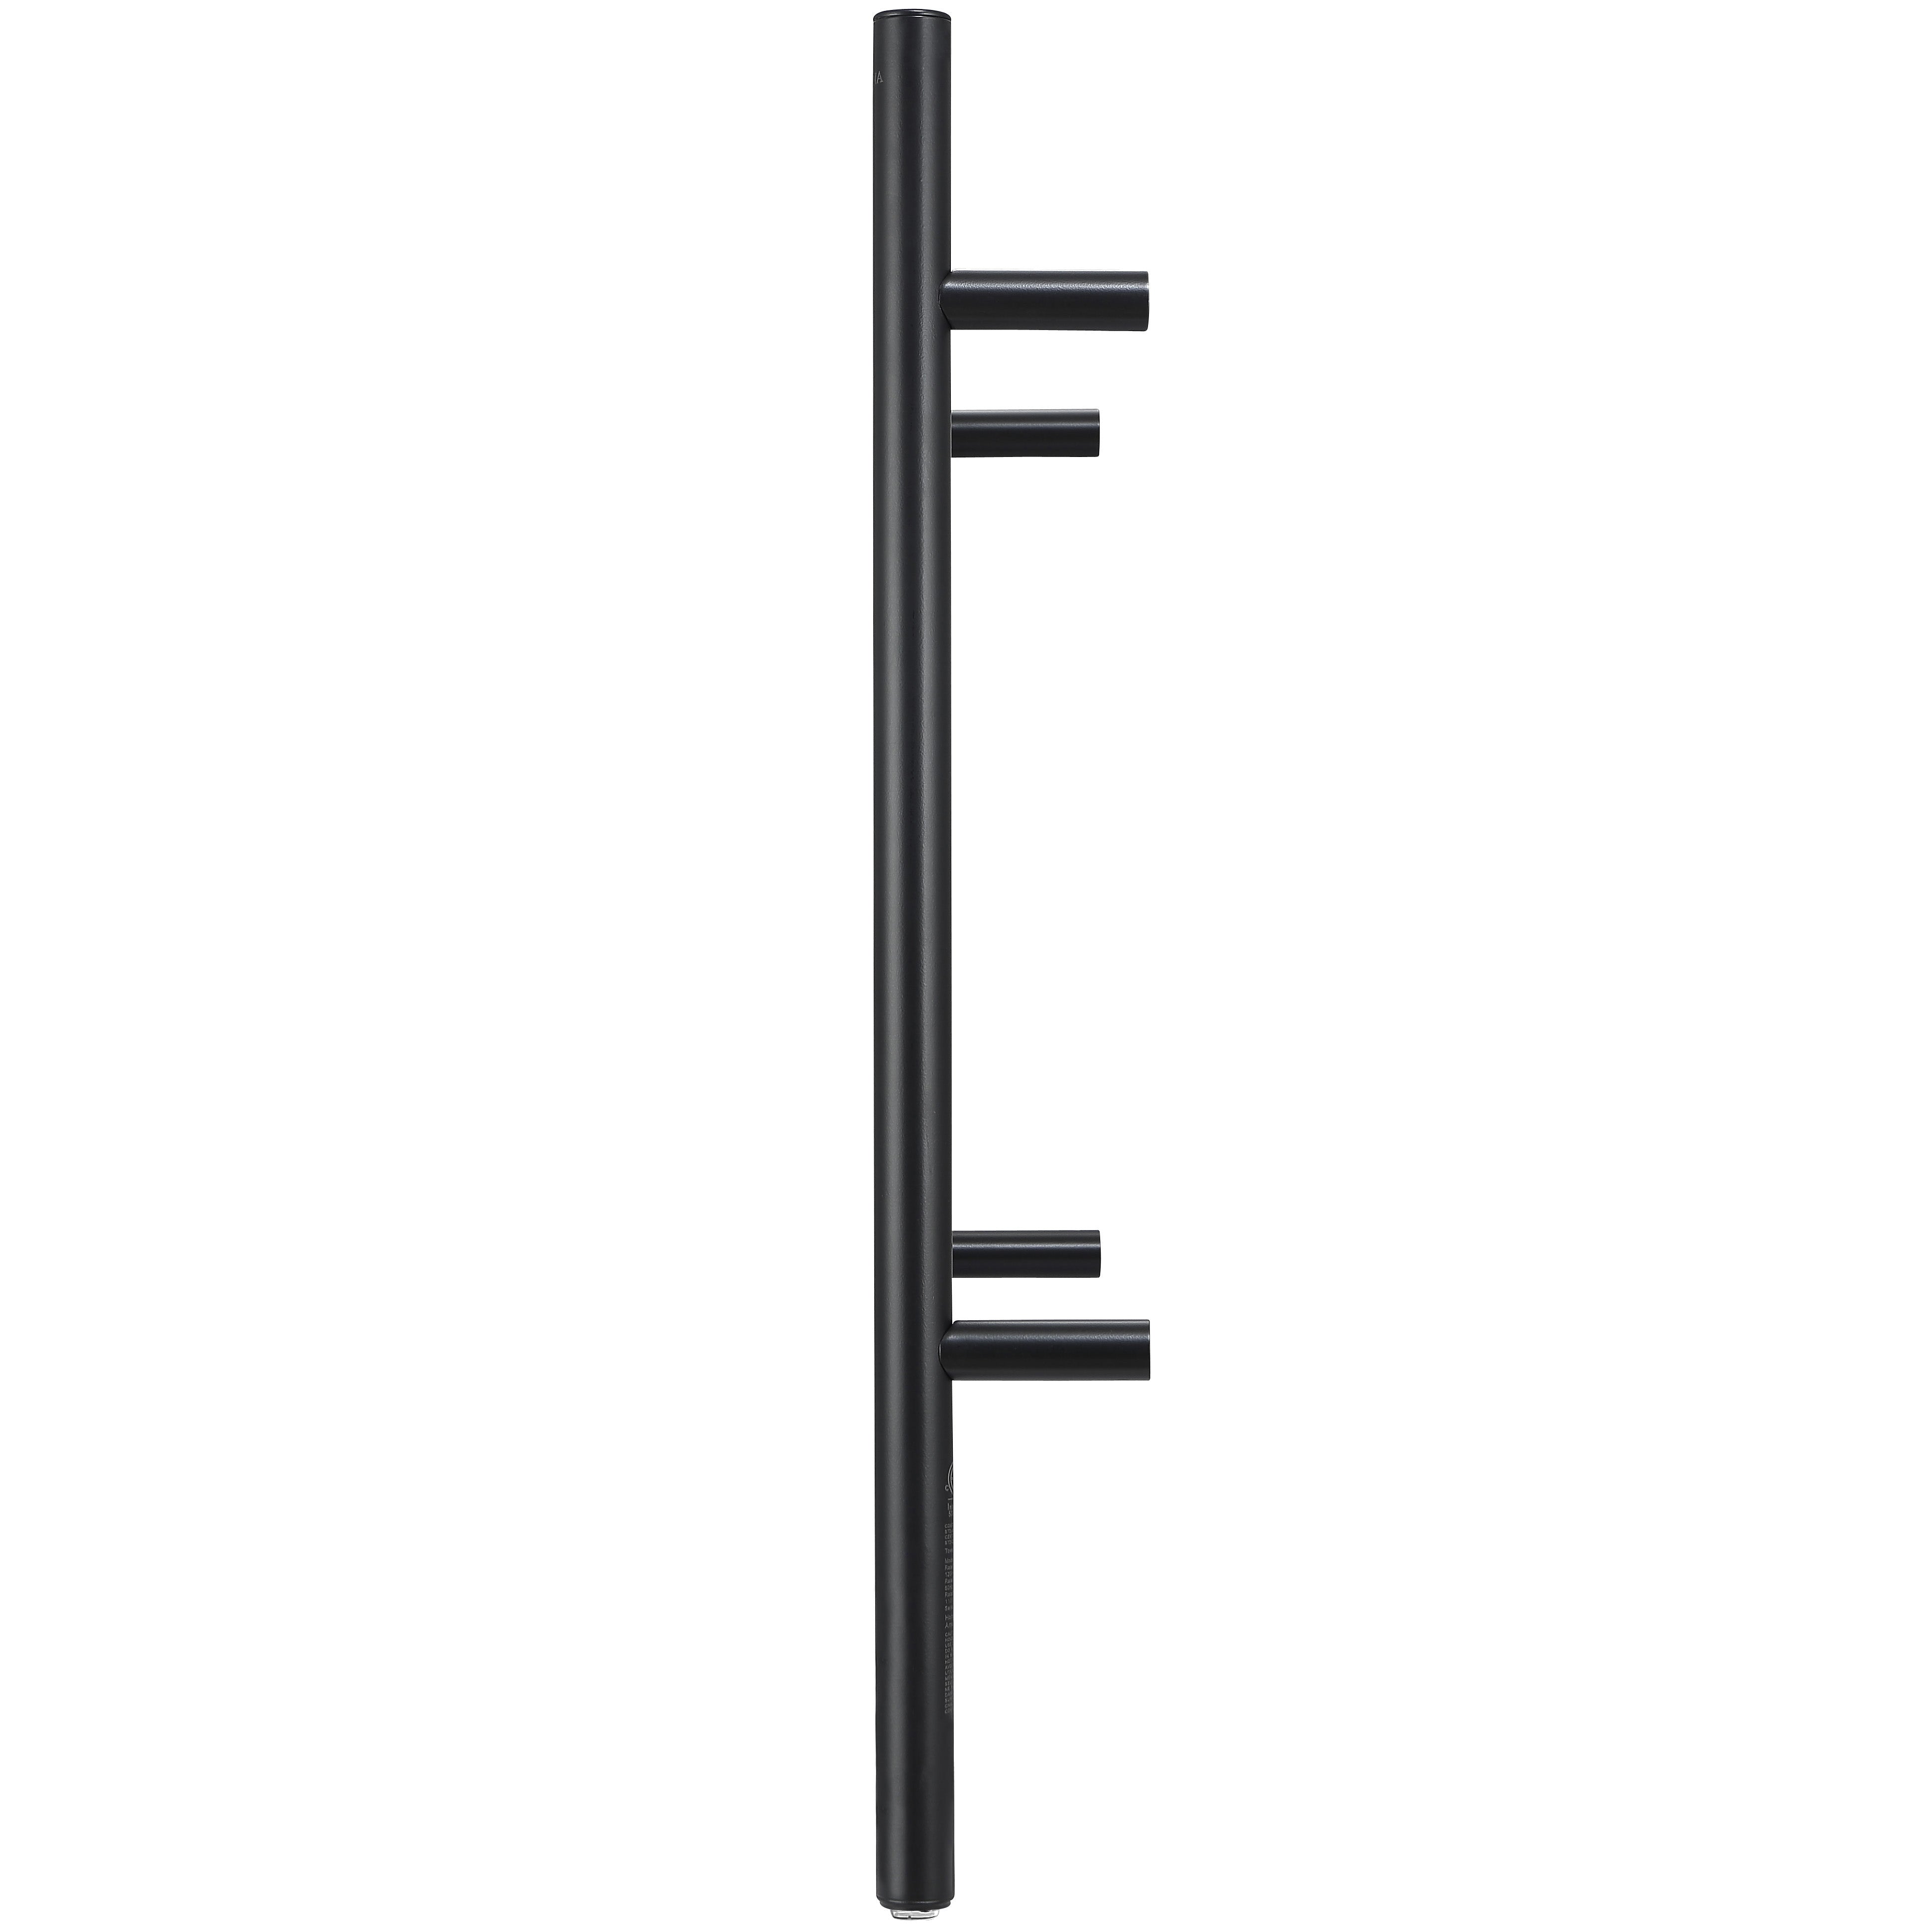 Prestige OBT 8-Bar Wall Mounted Towel Warmer with Integrated On-Board Timer in Matte Black